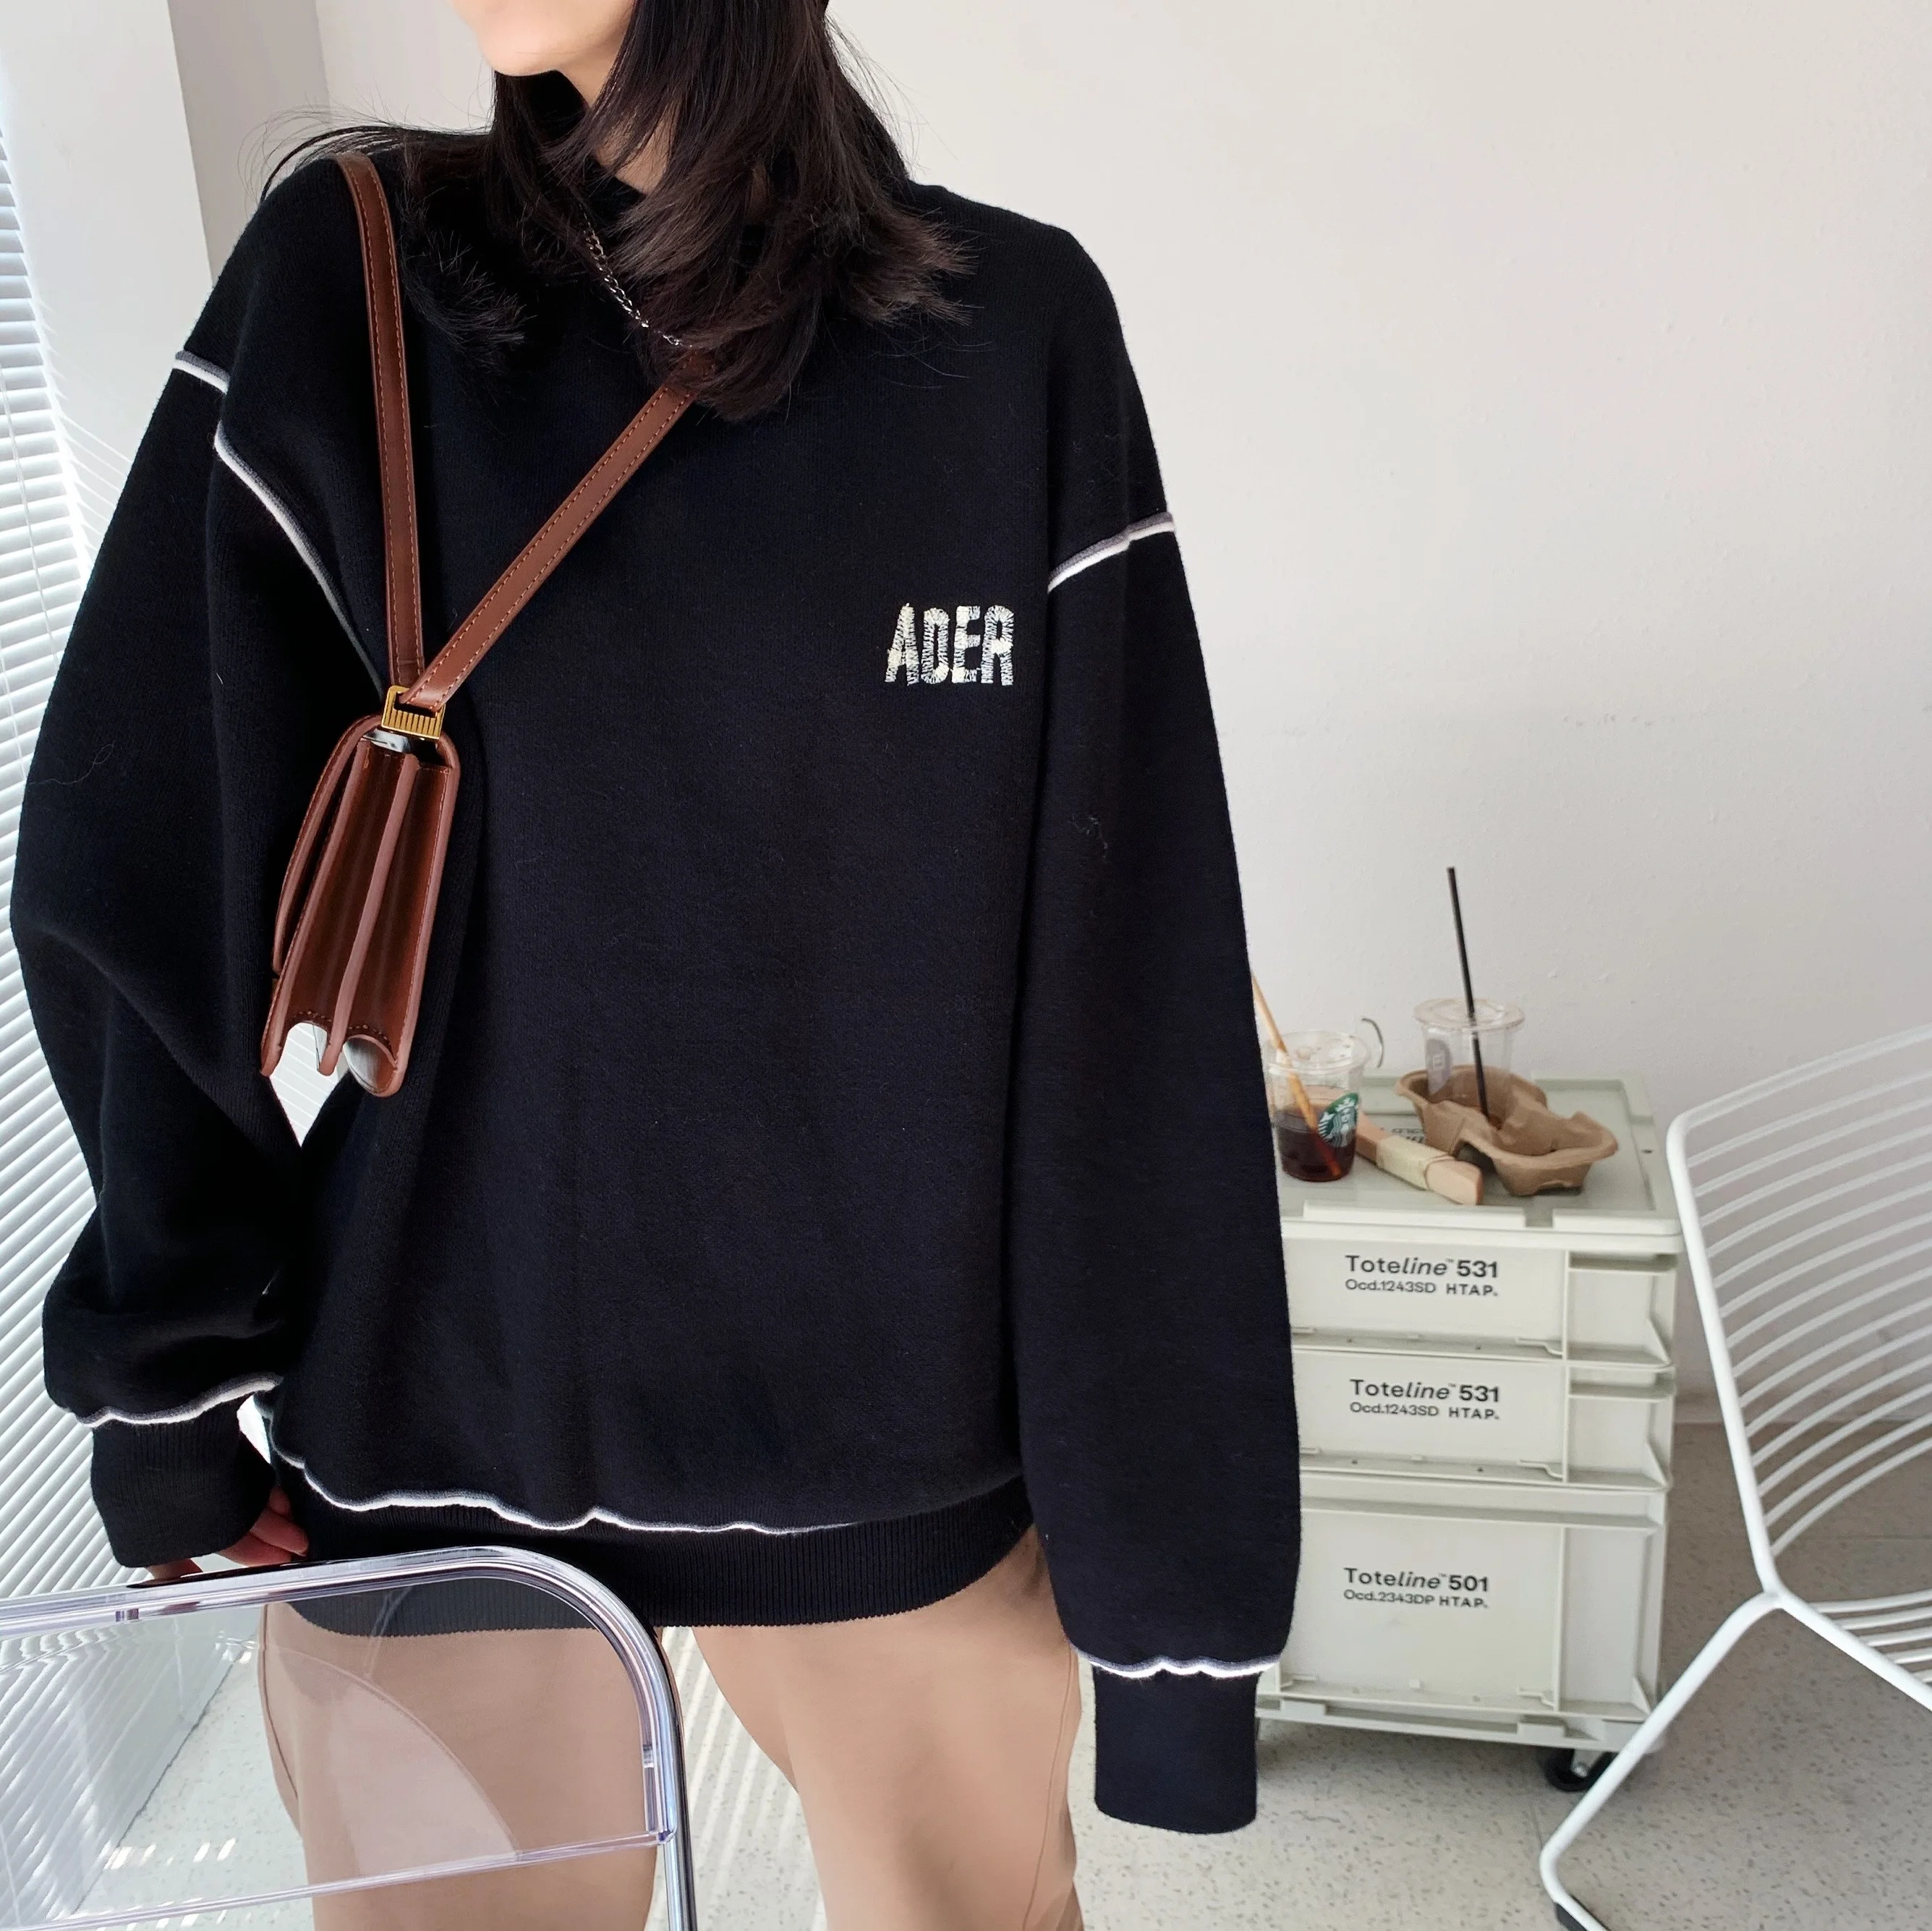 

ADER ERROR 2022 Korean Version of Autumn High-quality 1:1 Stitching Contrasting Line Sweater for Men and Women Adererror Sweater